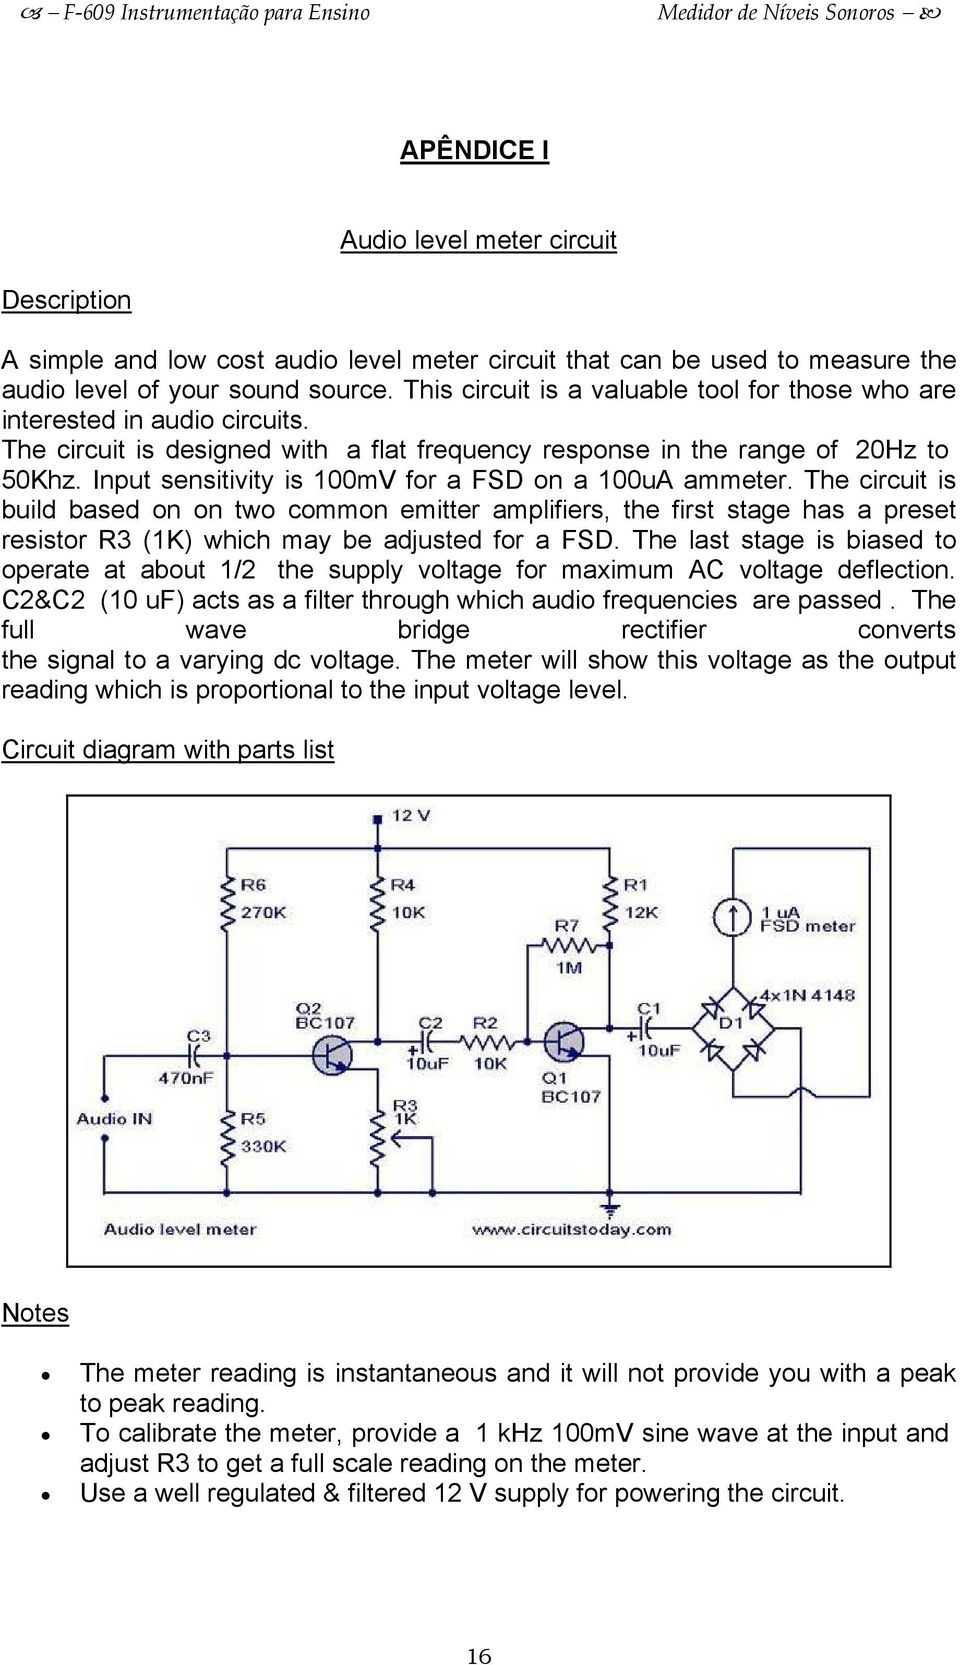 Input sensitivity is 100mV for a FSD on a 100uA ammeter. The circuit is build based on on two common emitter amplifiers, the first stage has a preset resistor R3 (1K) which may be adjusted for a FSD.